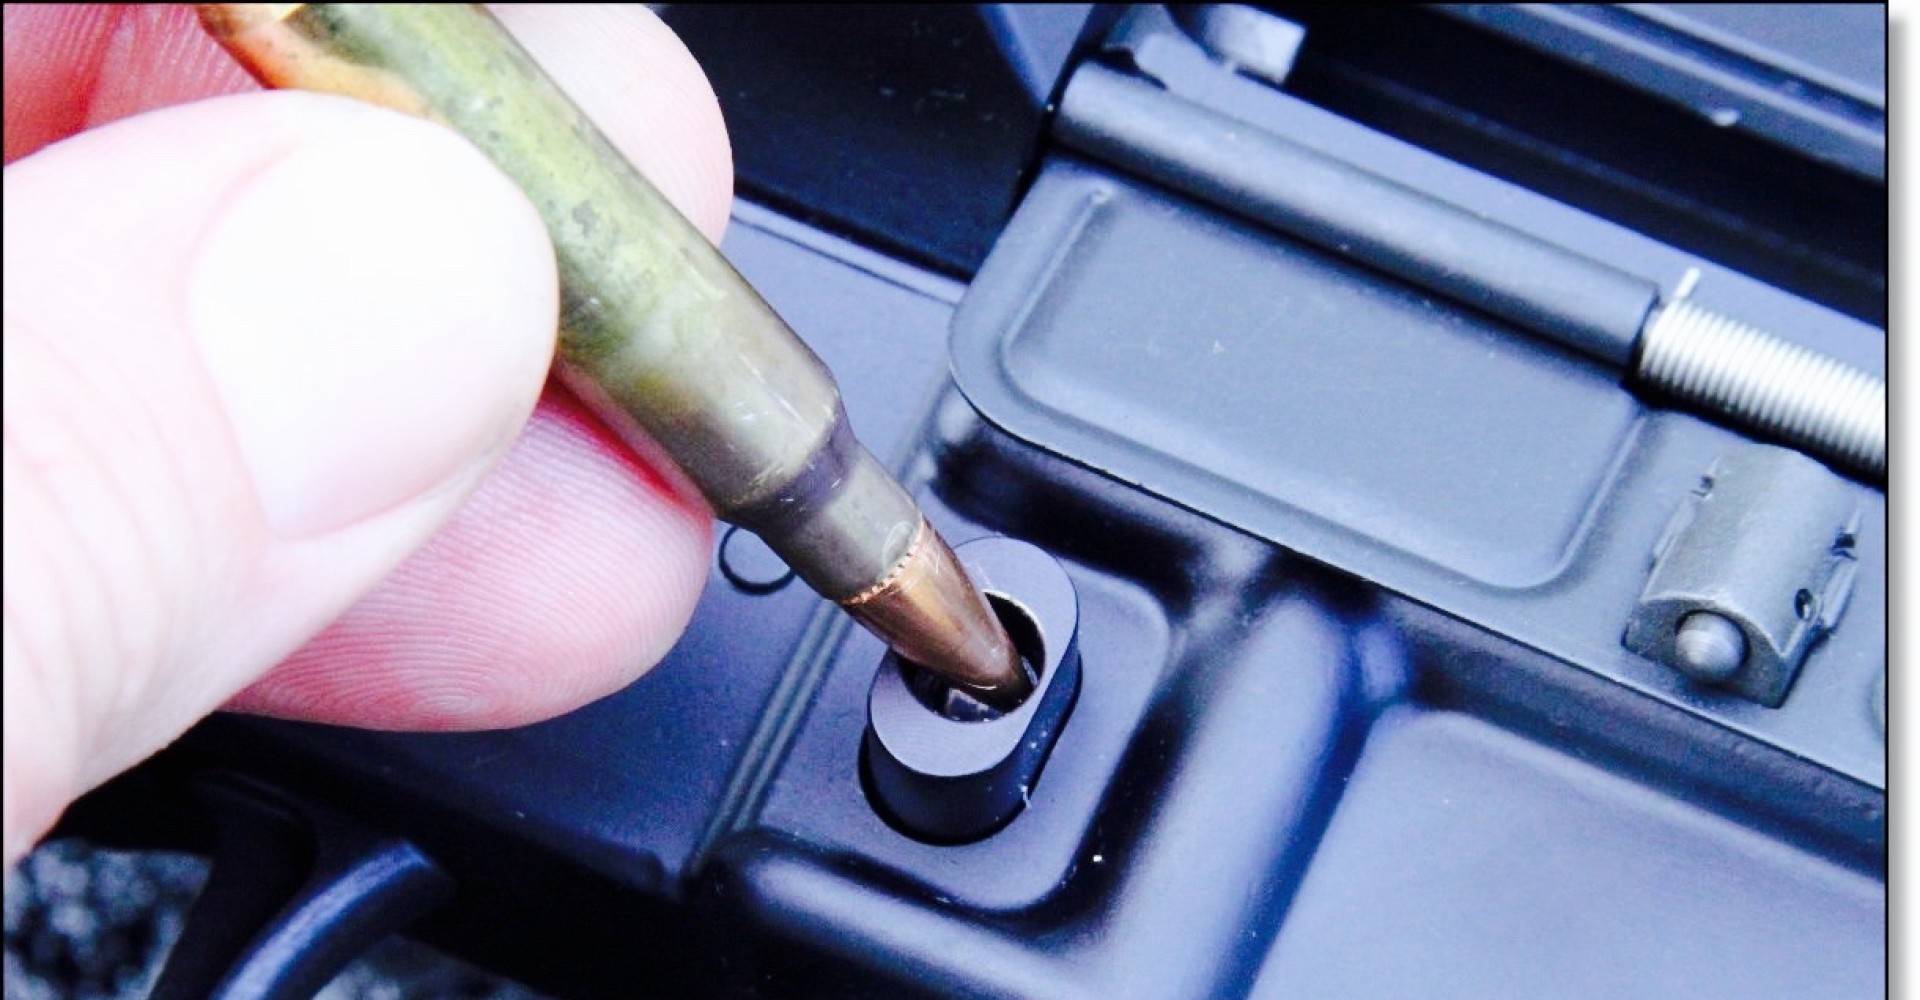 A "bullet button" requires a special tool to detach a magazine from a rifle, though a bullet can also be used. (Photo: GunsAmerica.com) 